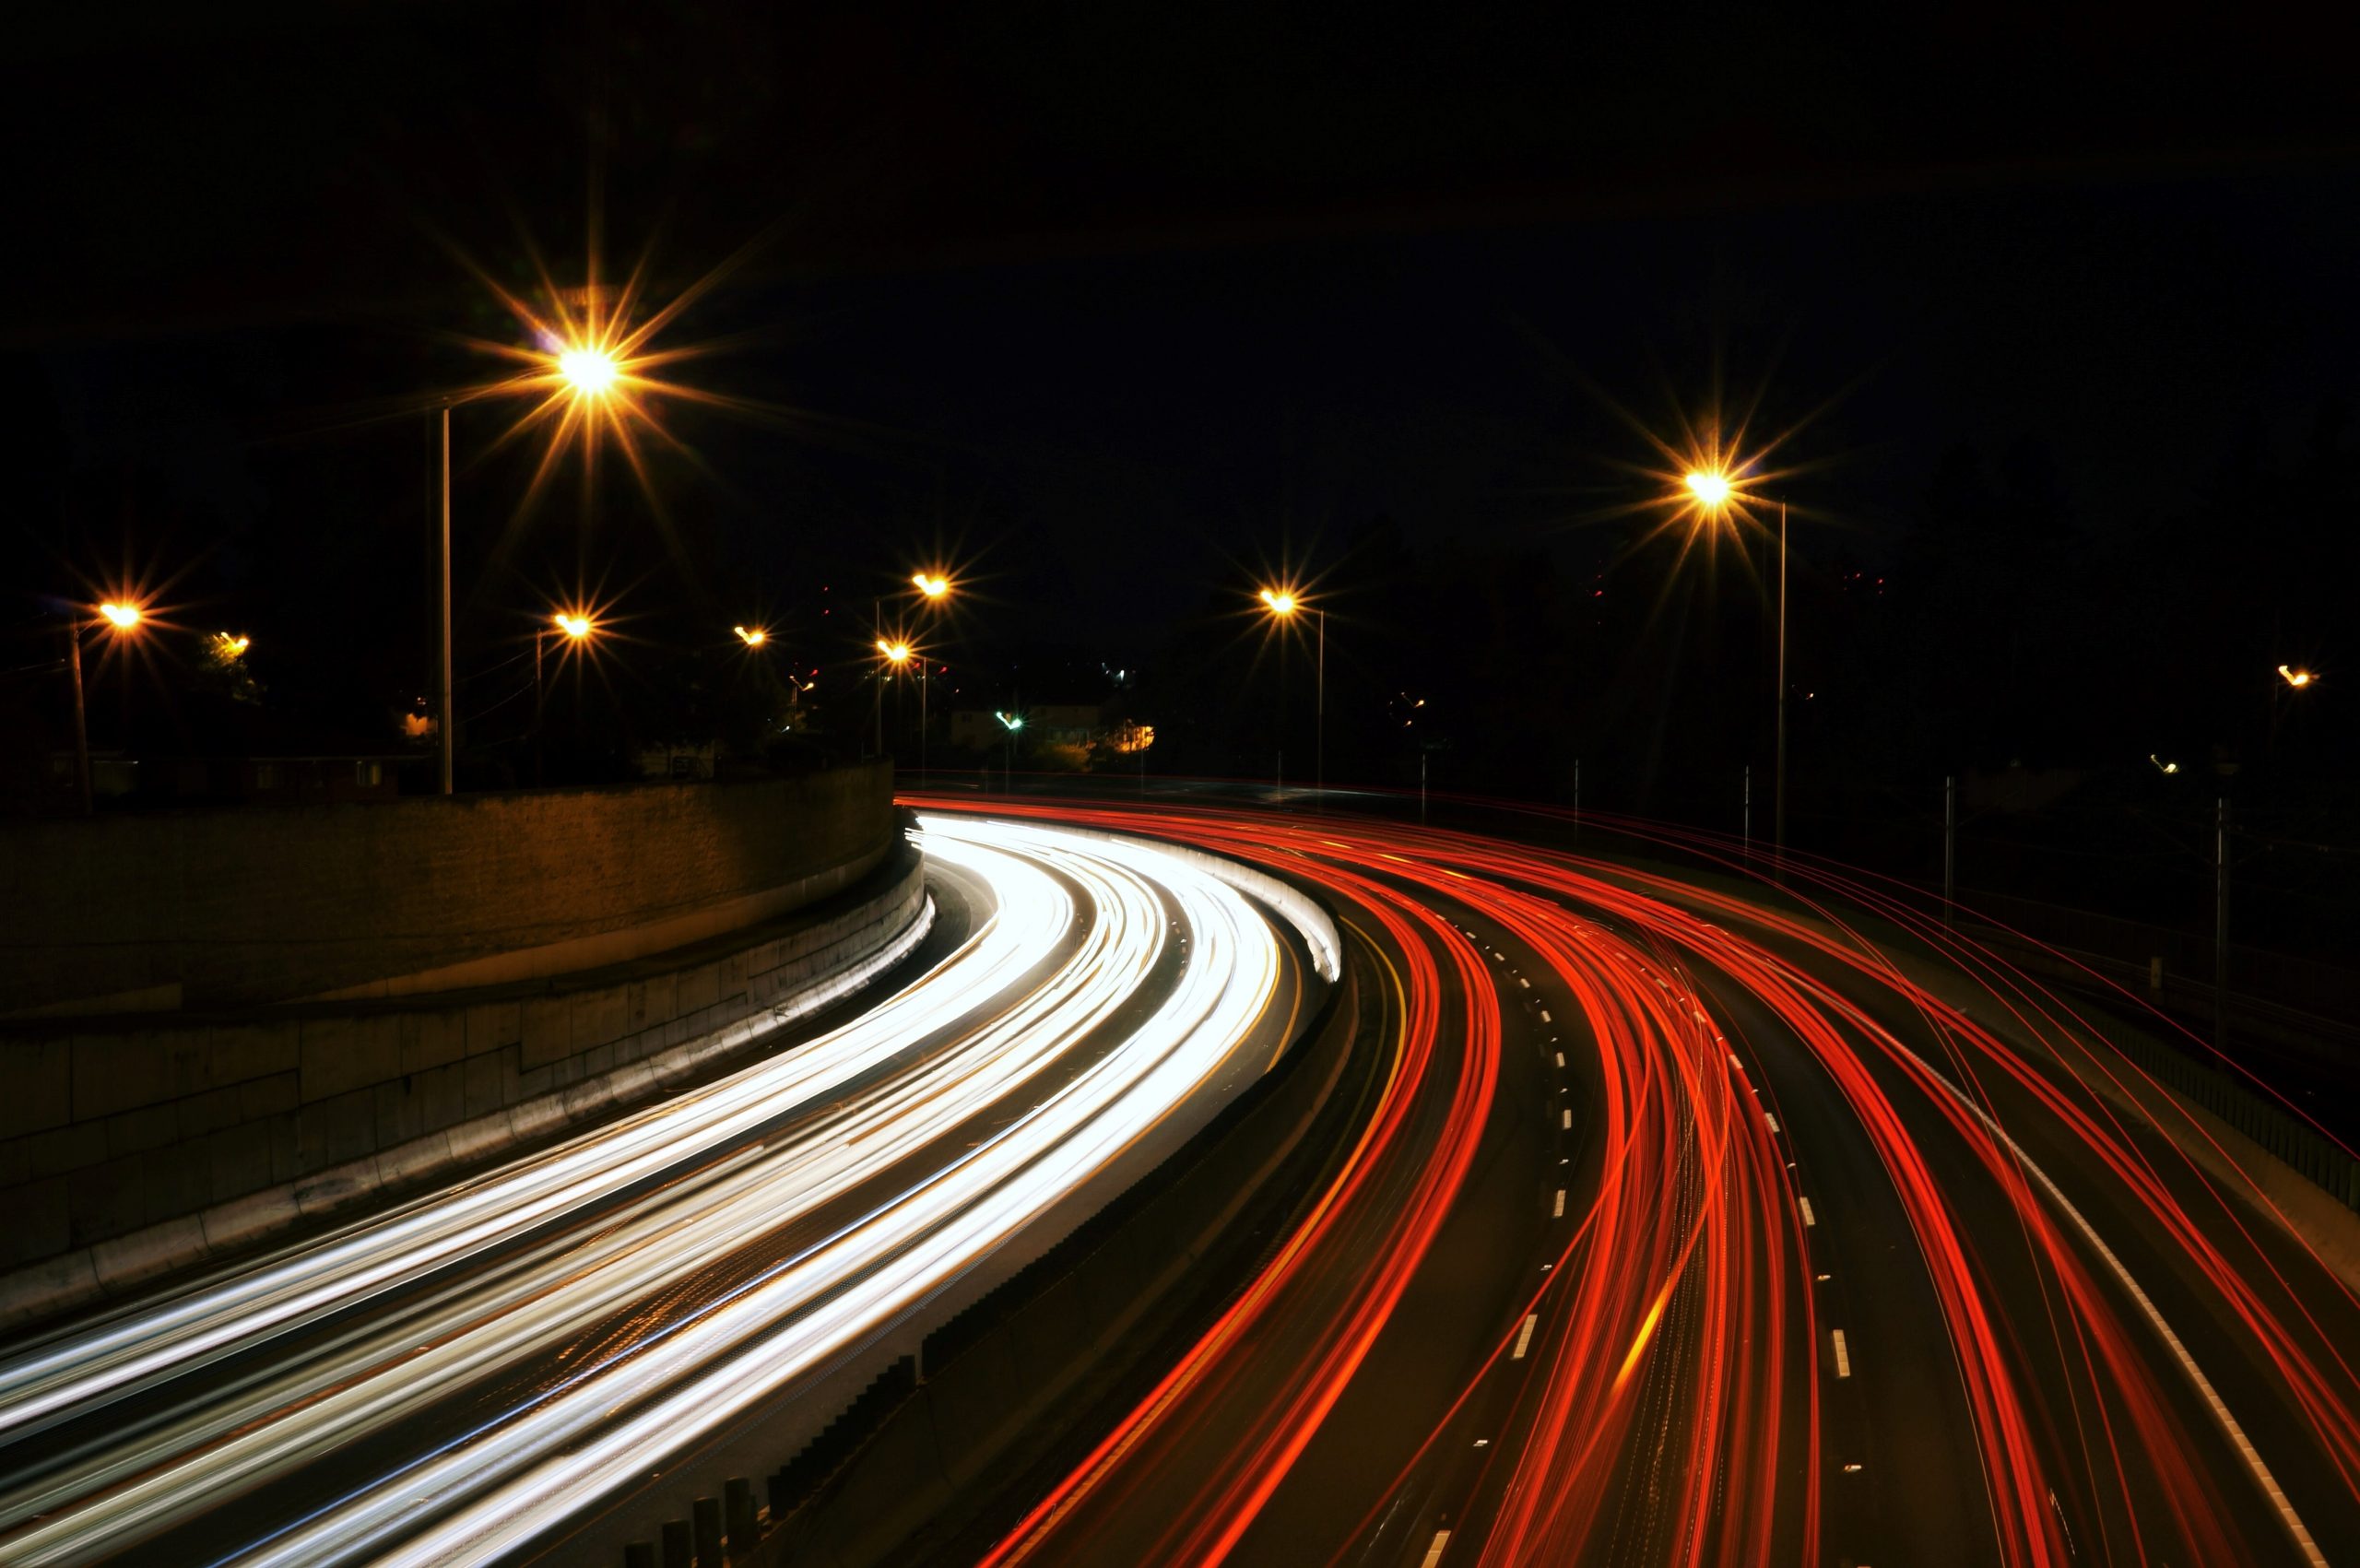 Highway at night with headlights and brake lights forming white and red light trails.